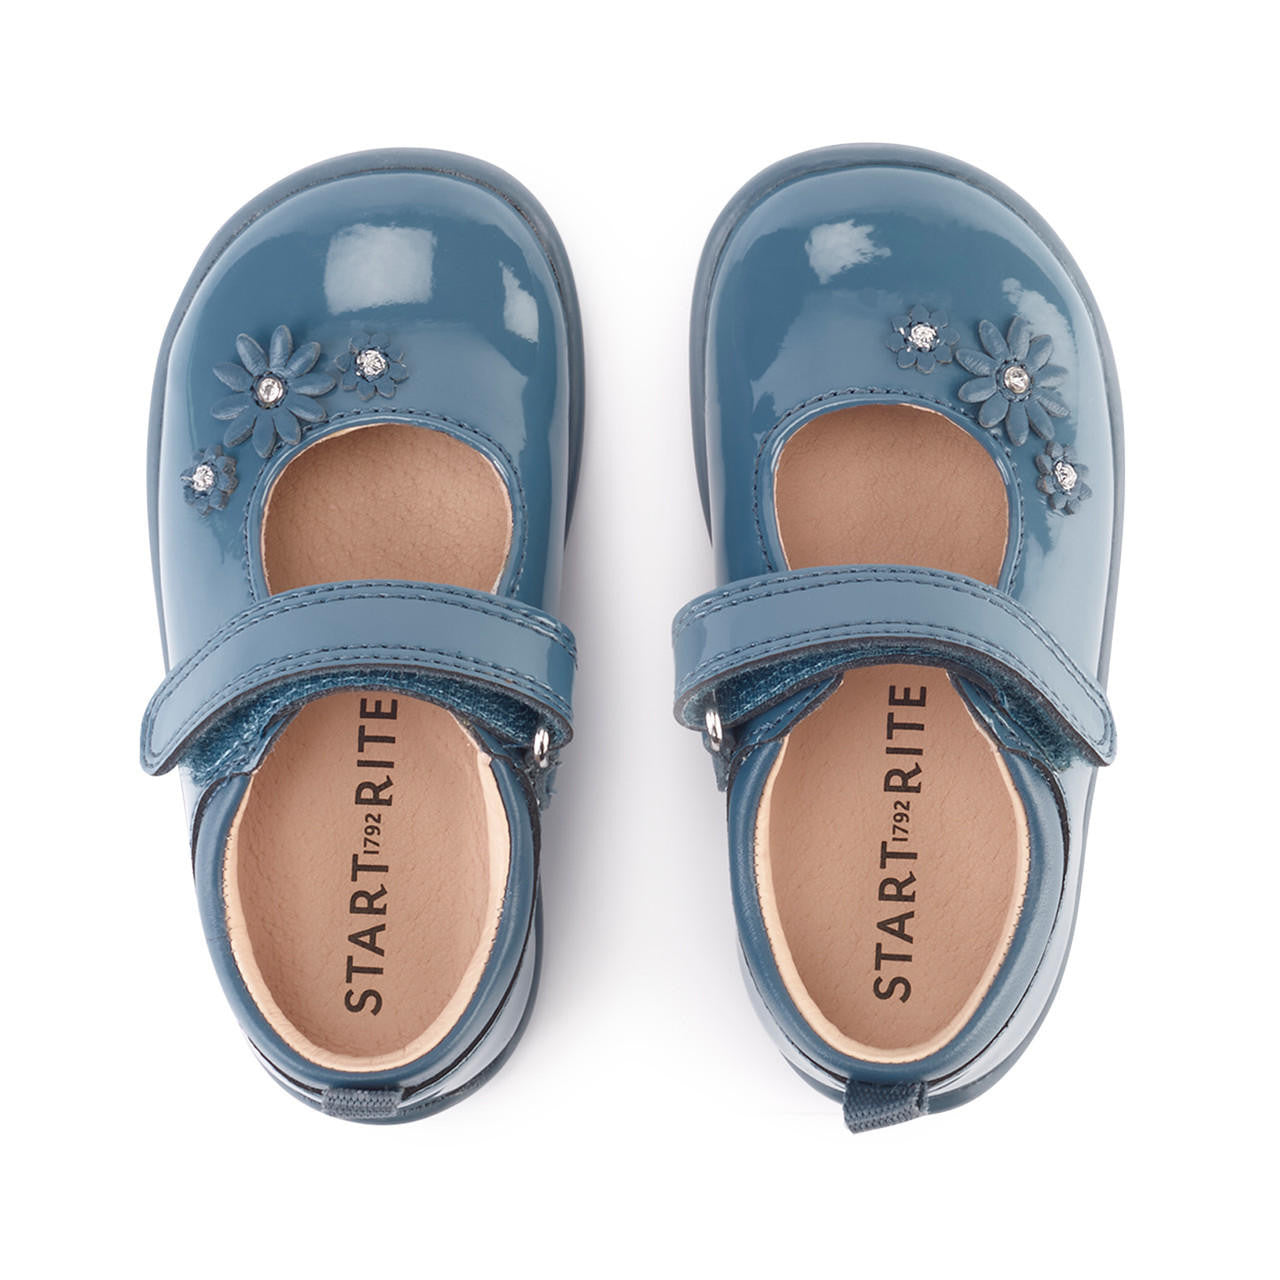 A pair of girls Mary Jane shoes by Start Rite, style Fairy Tale, in pale blue patent with velcro fastening. Above view.